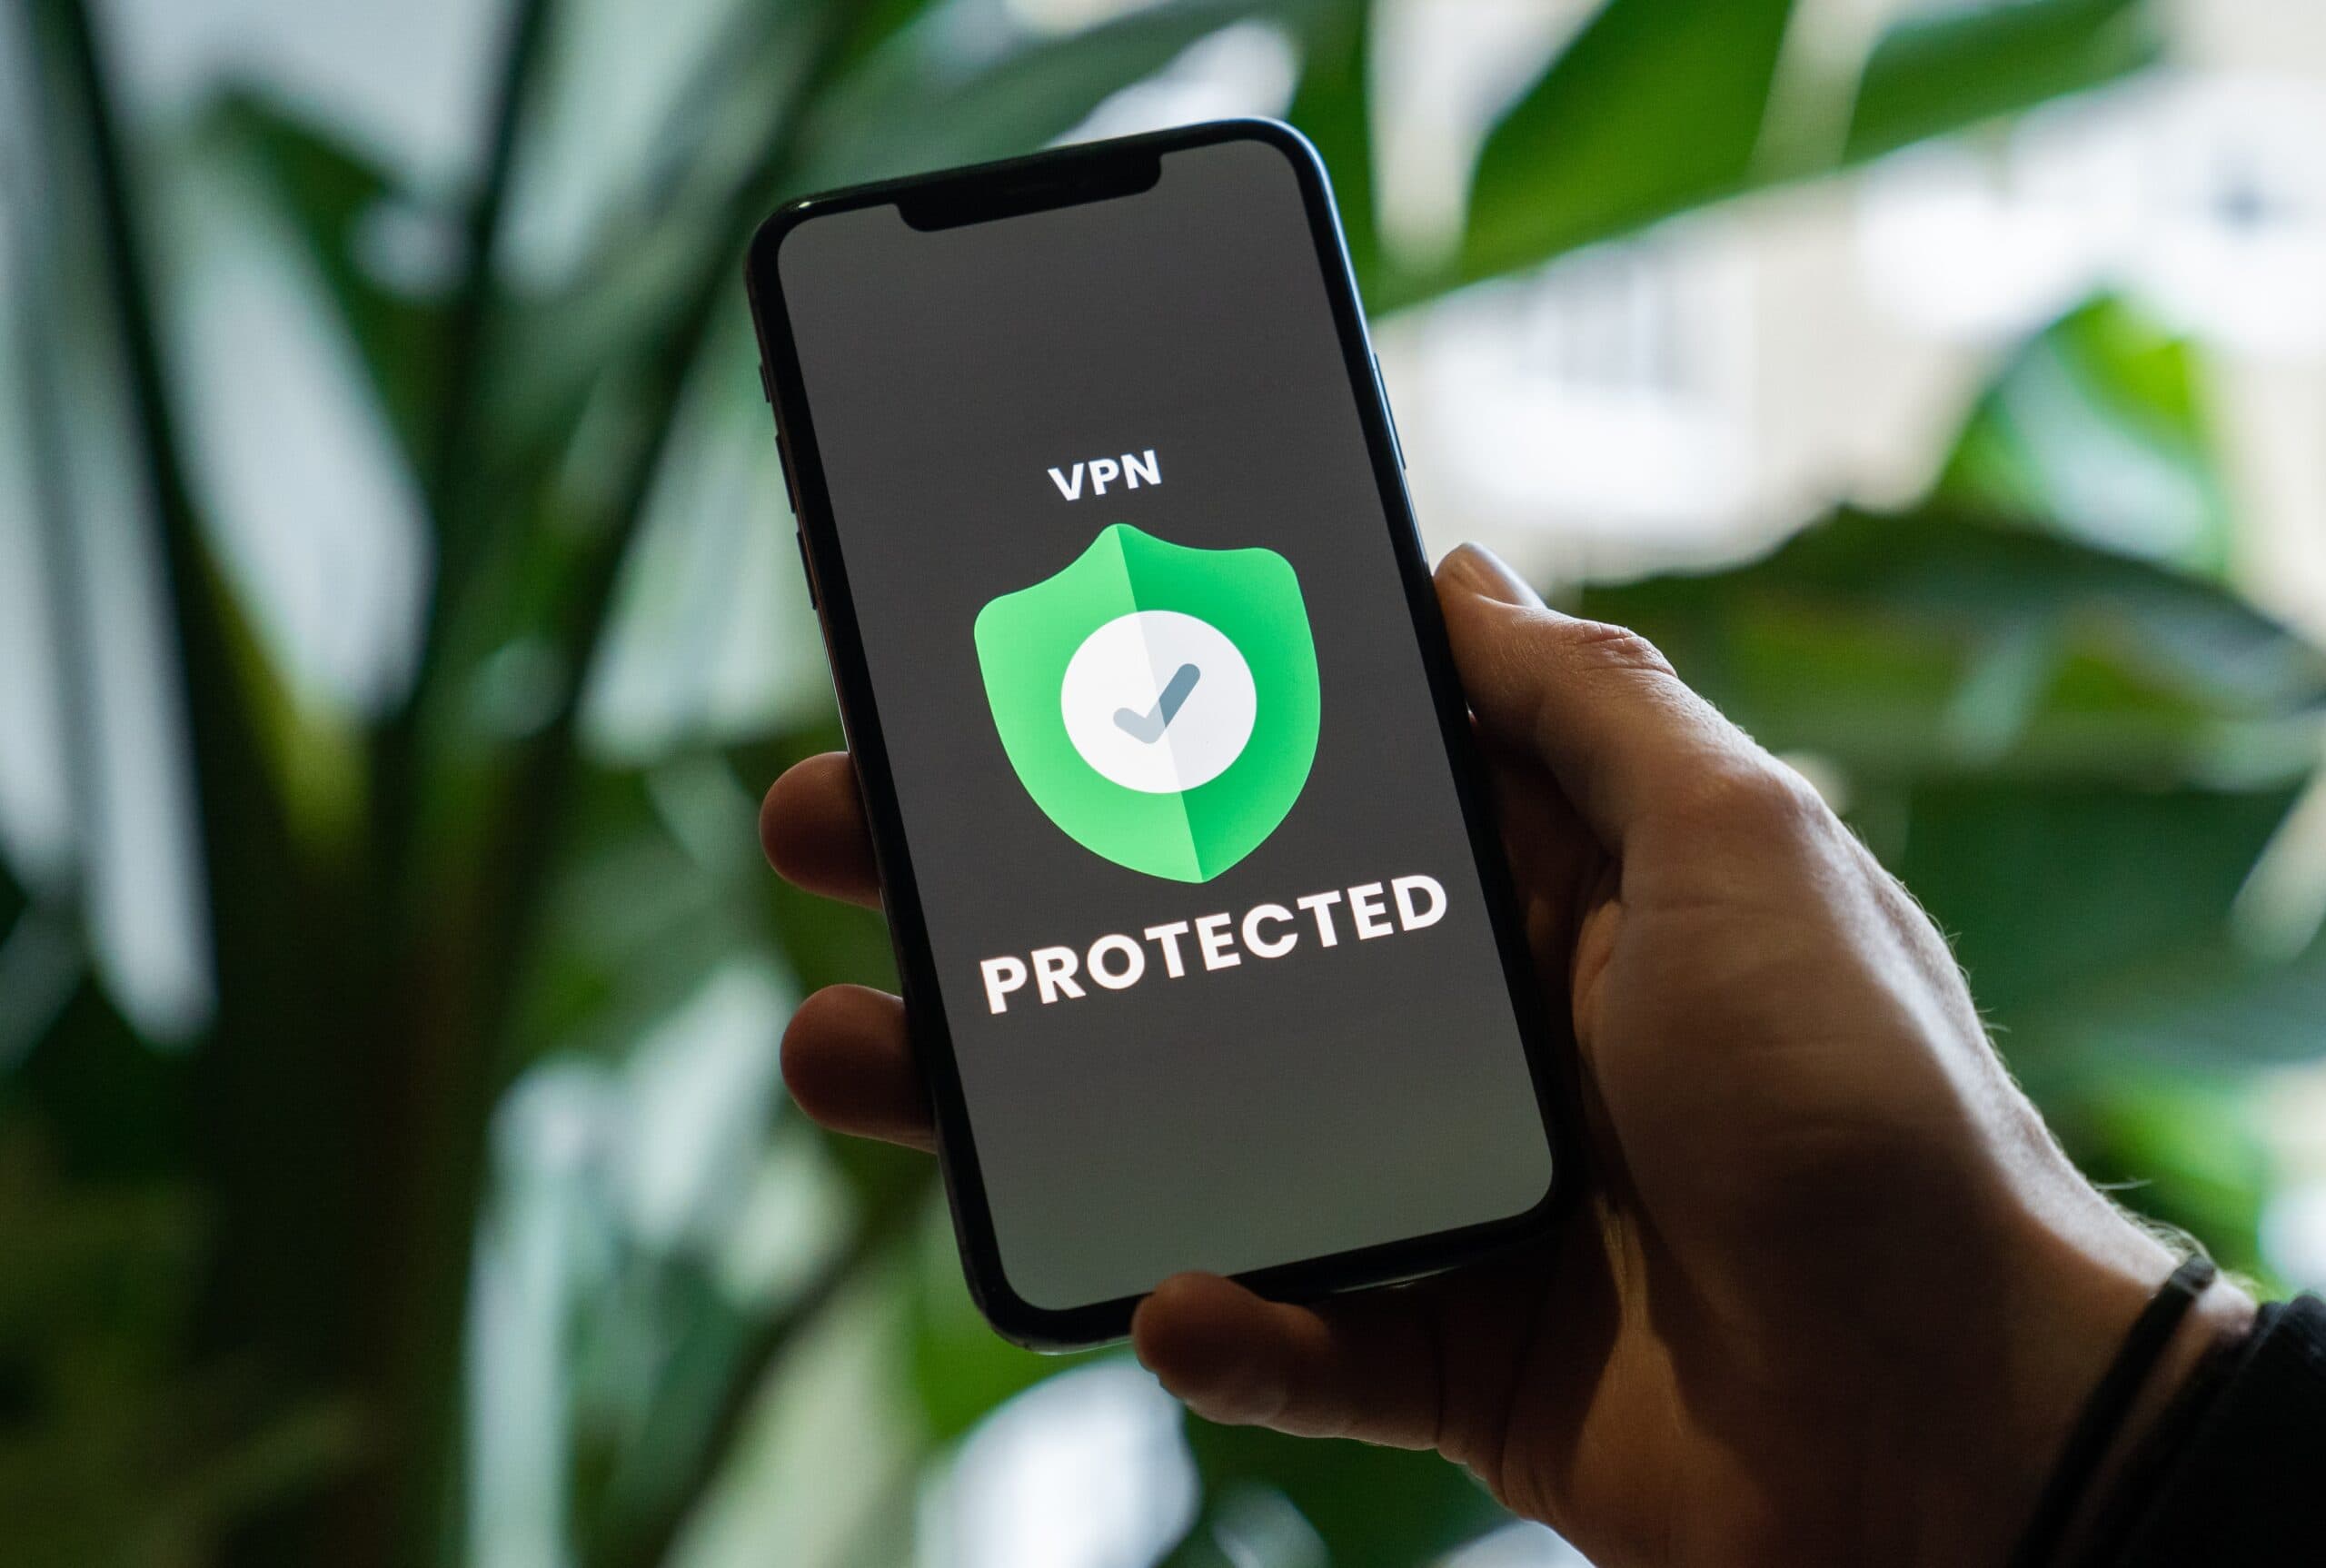 A person holding up a phone with the word protected on it, exploring the importance of online privacy.